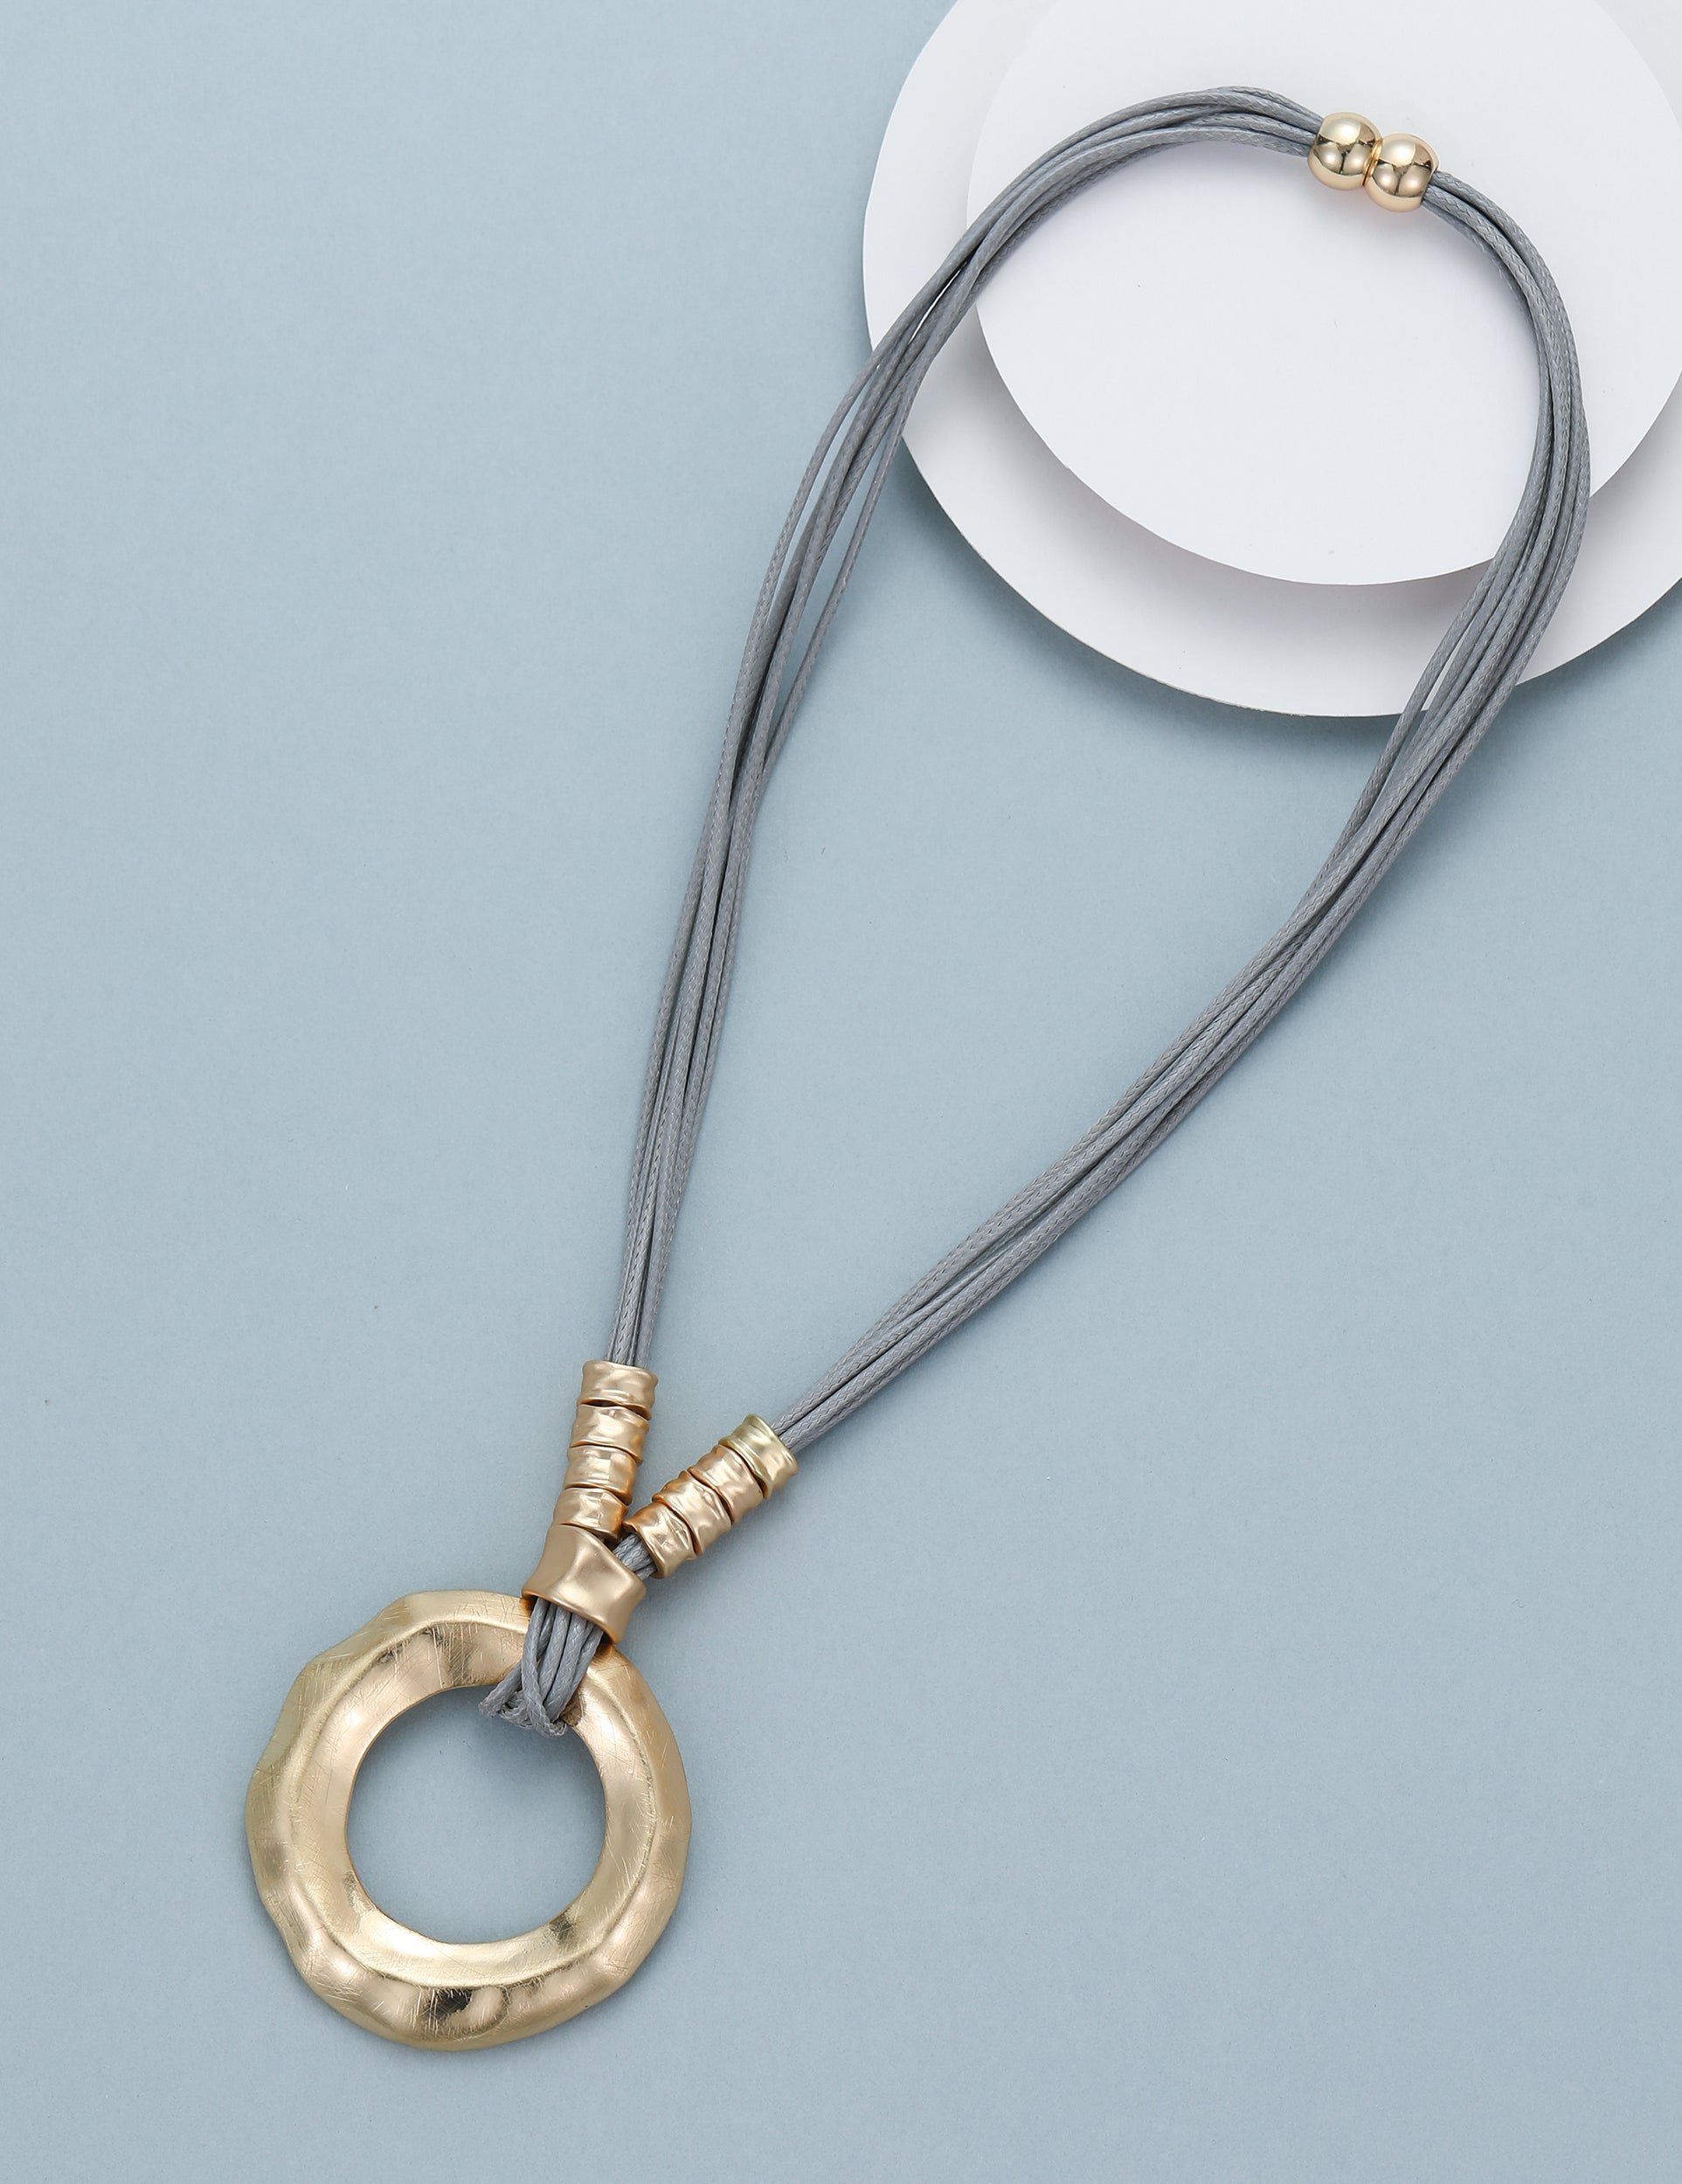 Short necklace, with gold-toned open circular pendant and magnetic opening/closure  - on leather strands